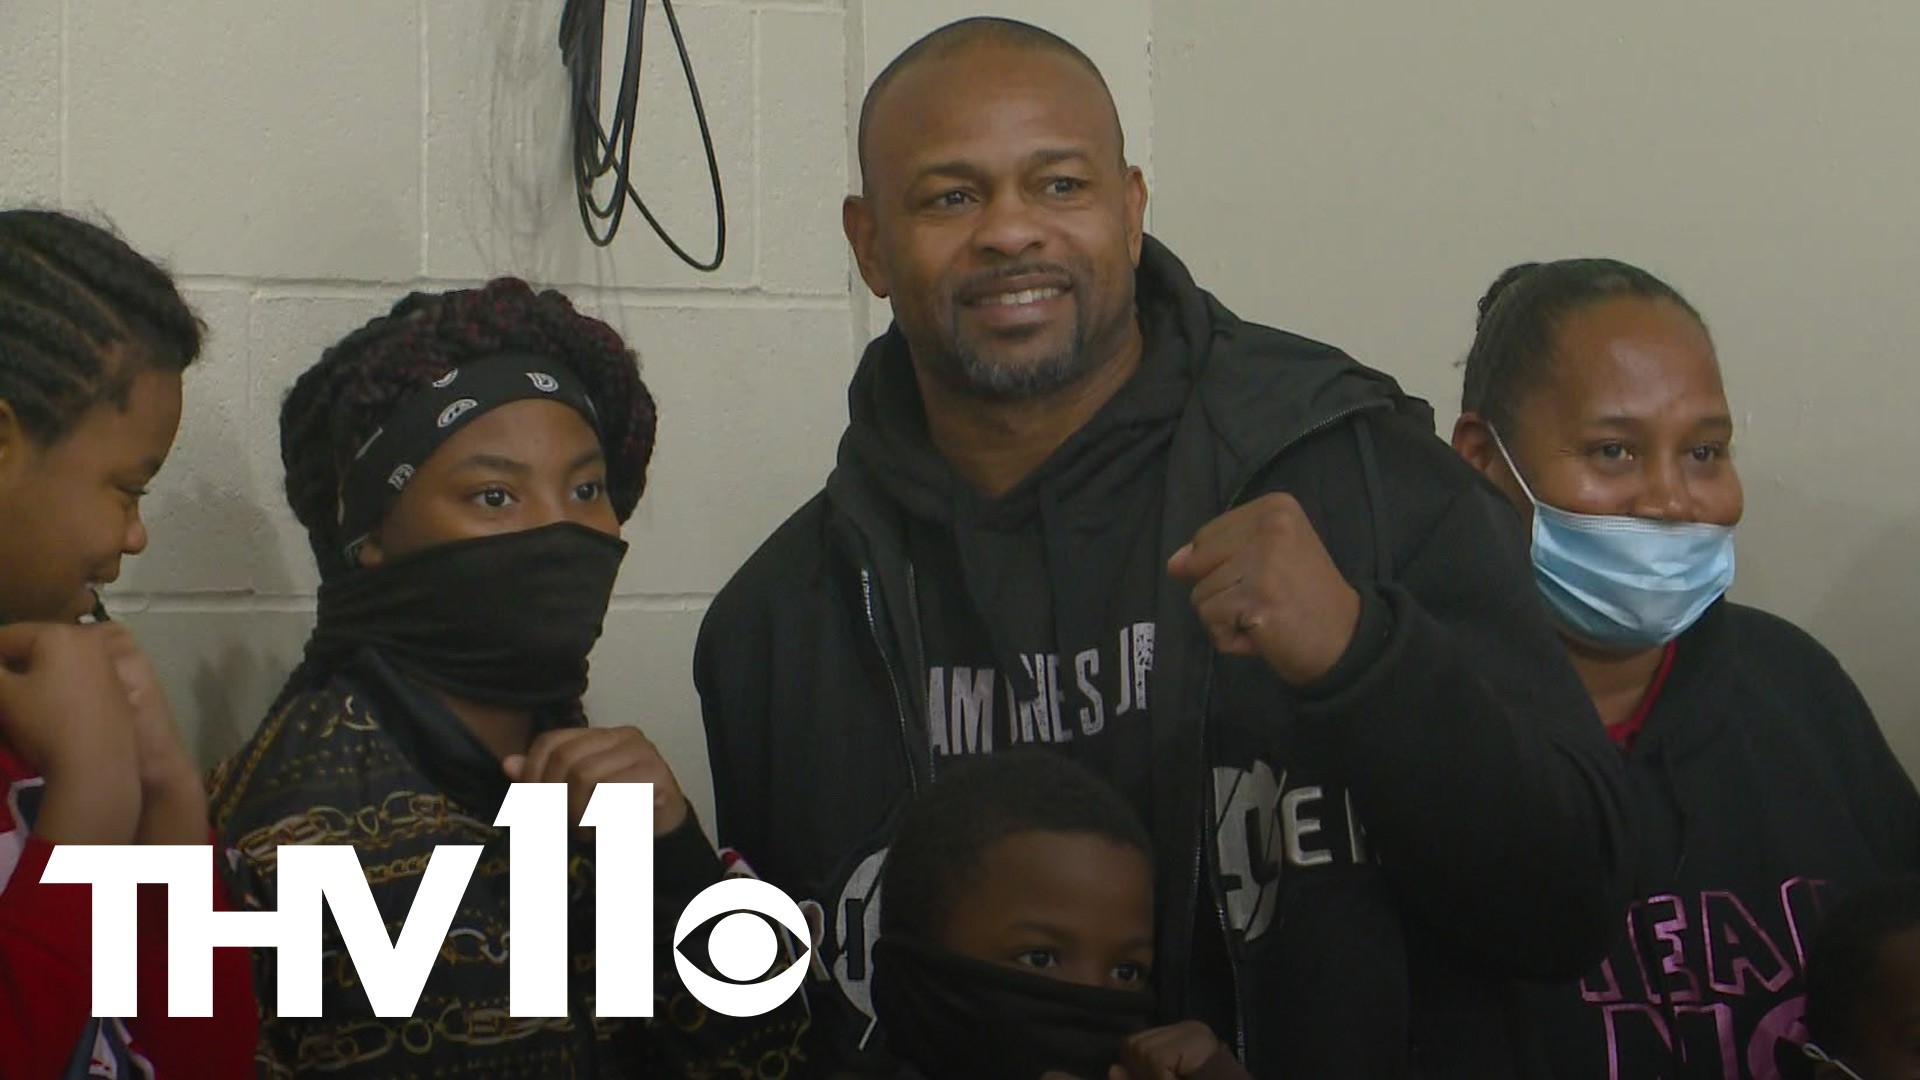 Following his fight with Mike Tyson, Roy Jones Jr. made a trip to Pine Bluff to meet with some young boxers that are a part of the Gloves Not Guns program.